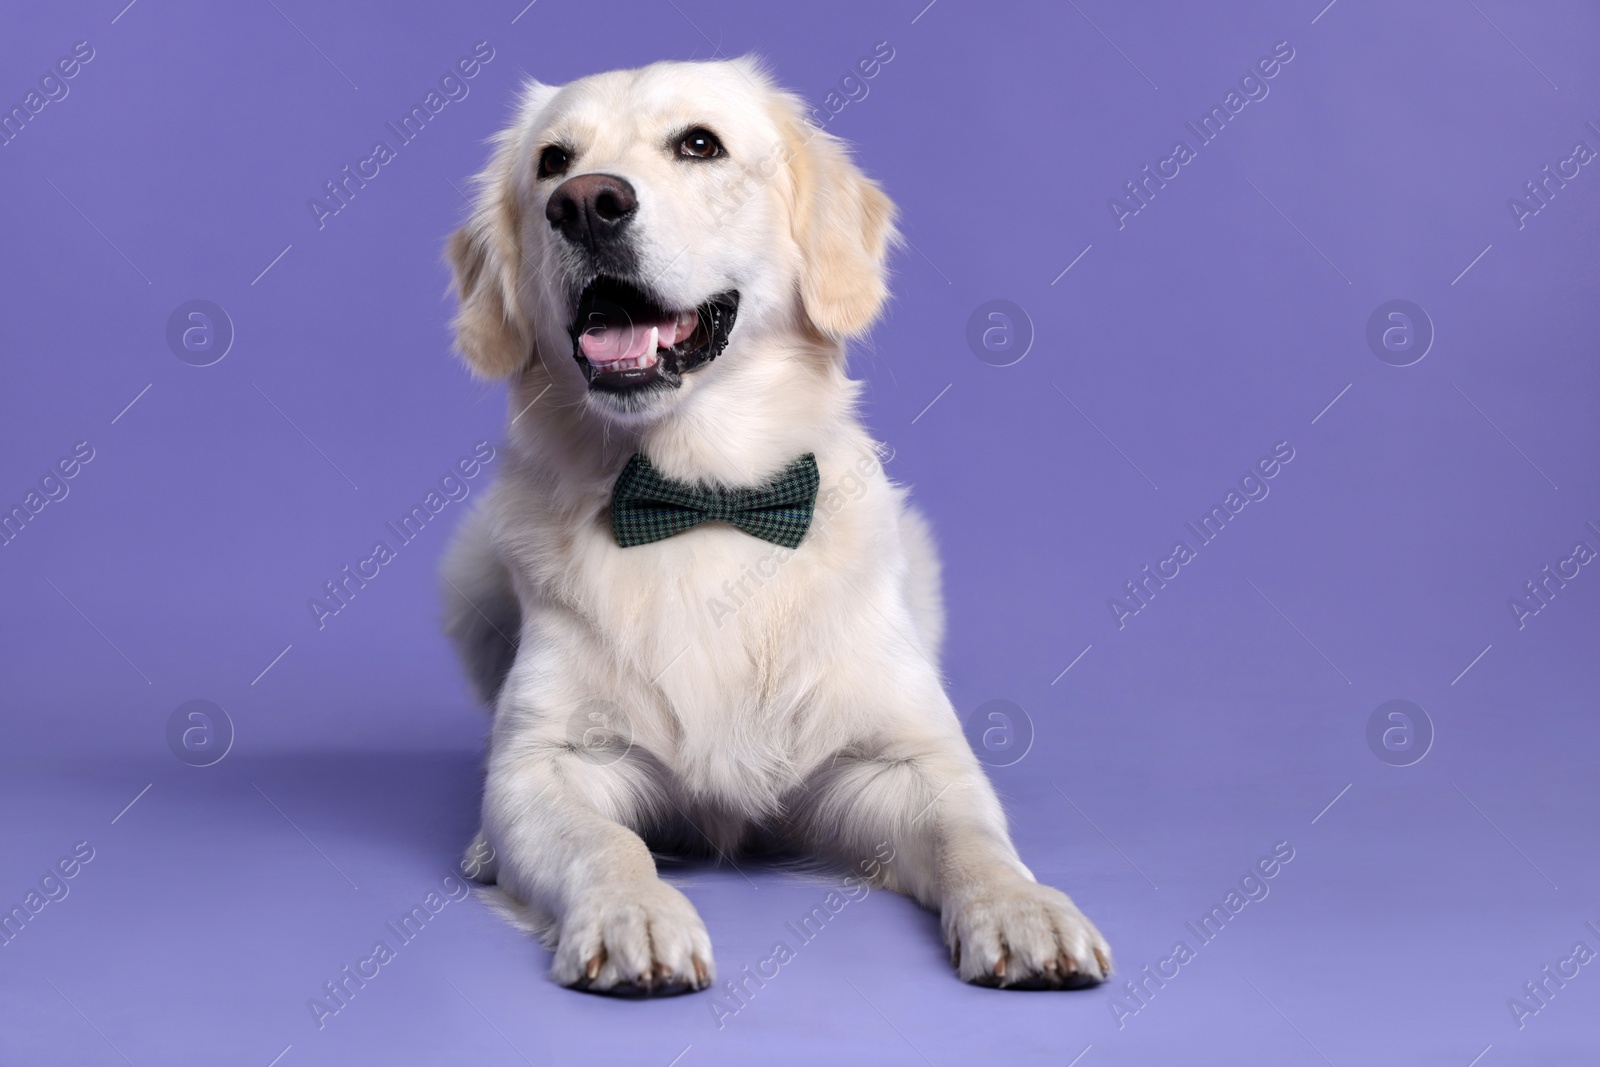 Photo of Cute Labrador Retriever with stylish bow tie on purple background. Space for text